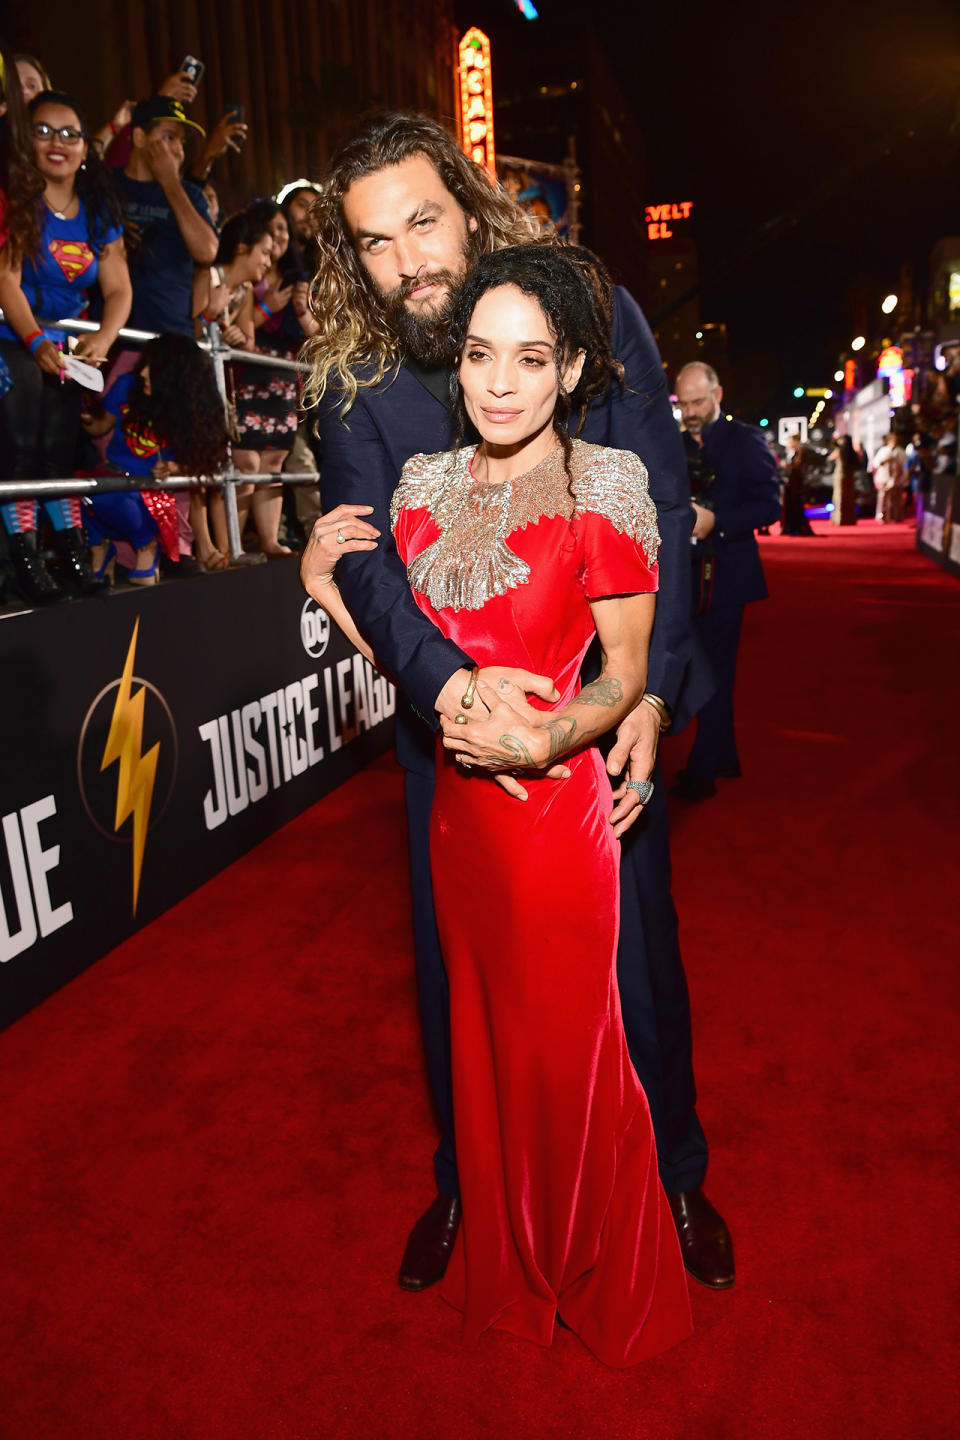 The newly married couple walked their first joint red carpet together since their nuptials.